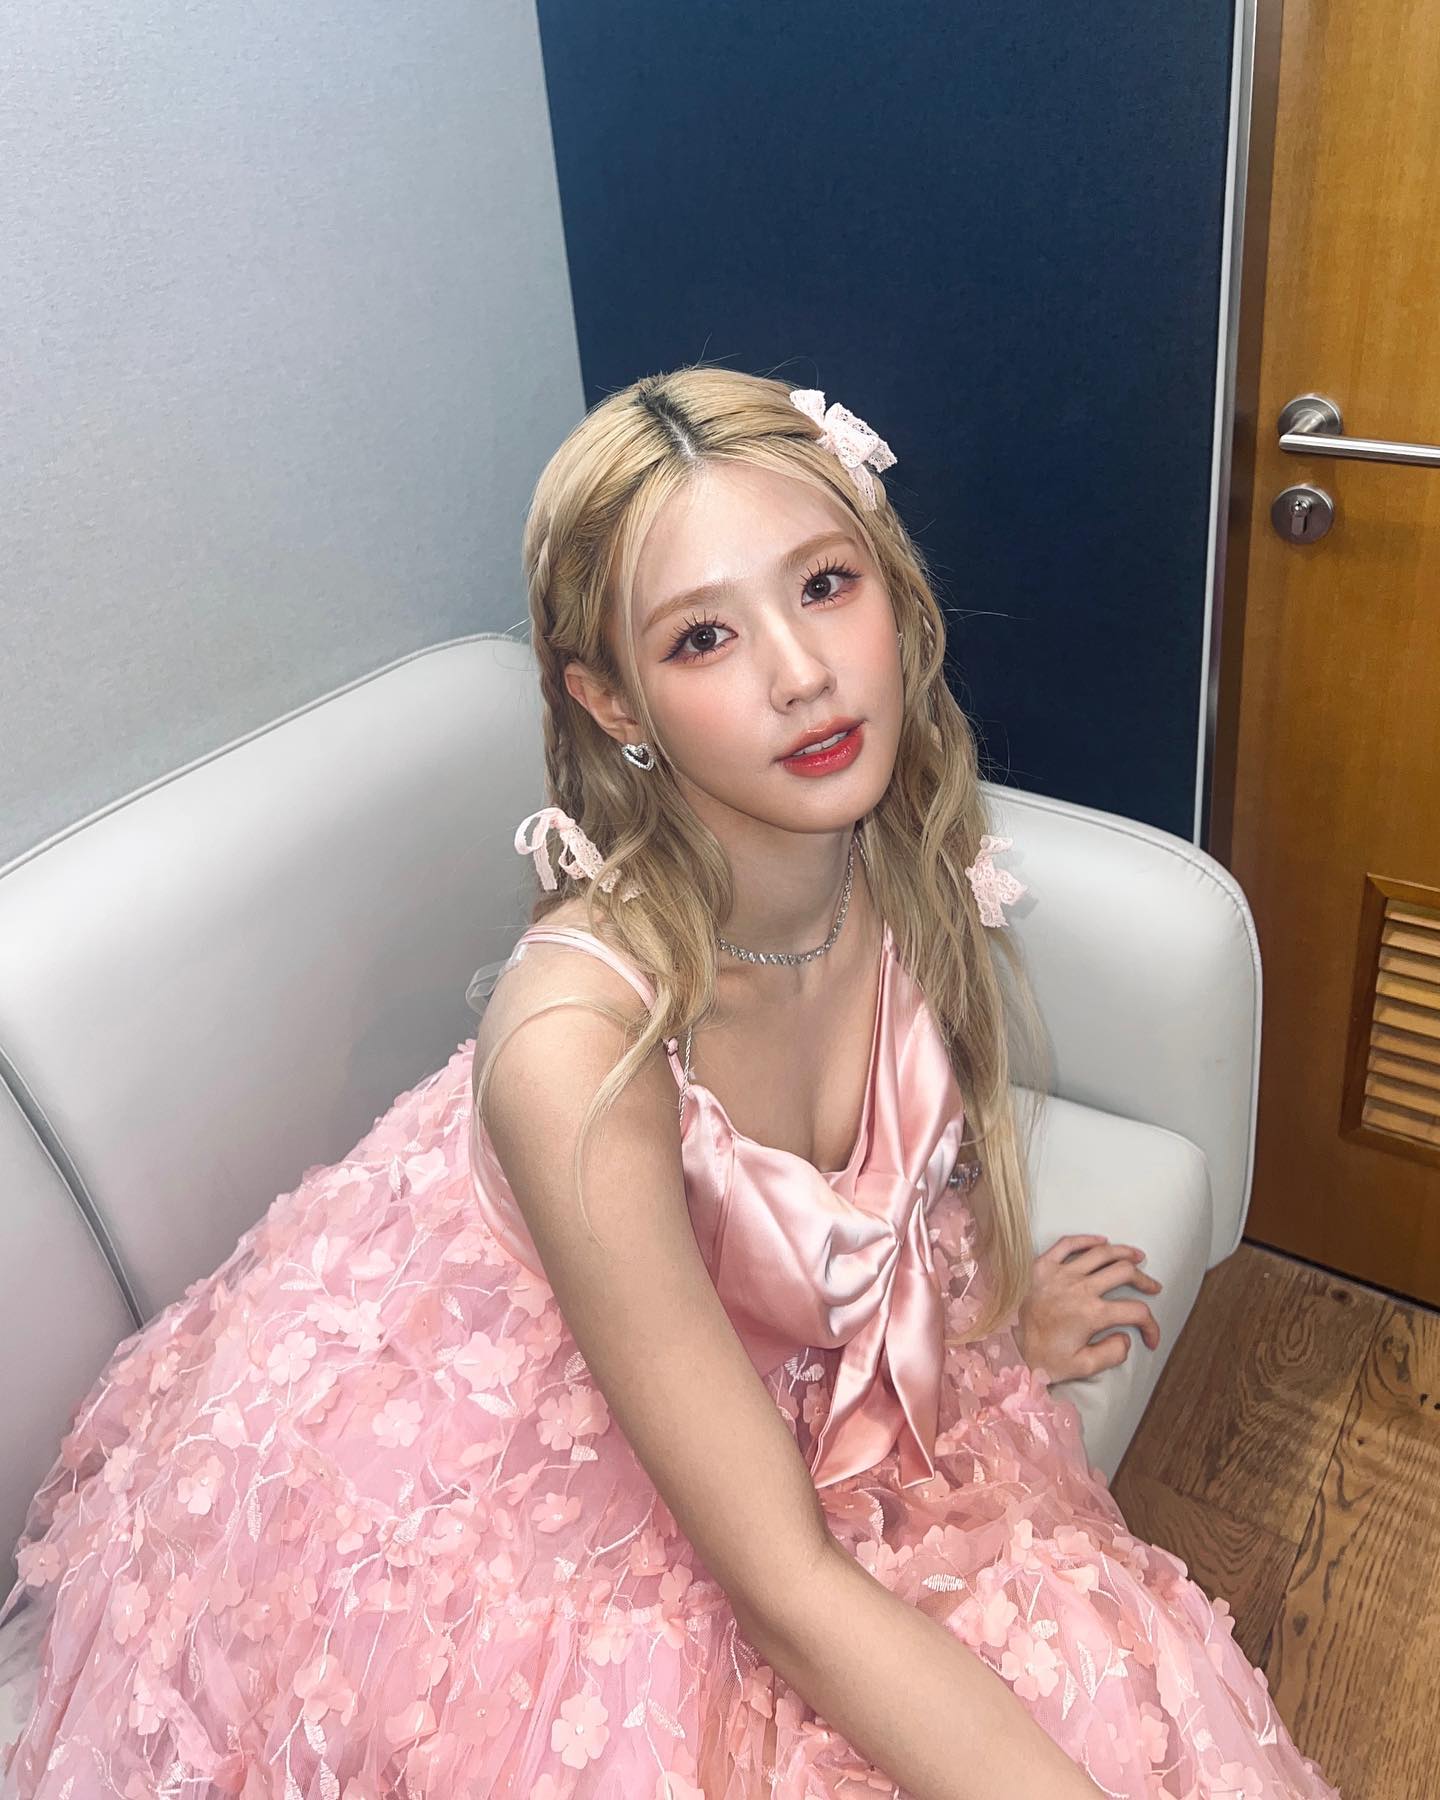 In (G)I-DLE's Miyeon waiting room,